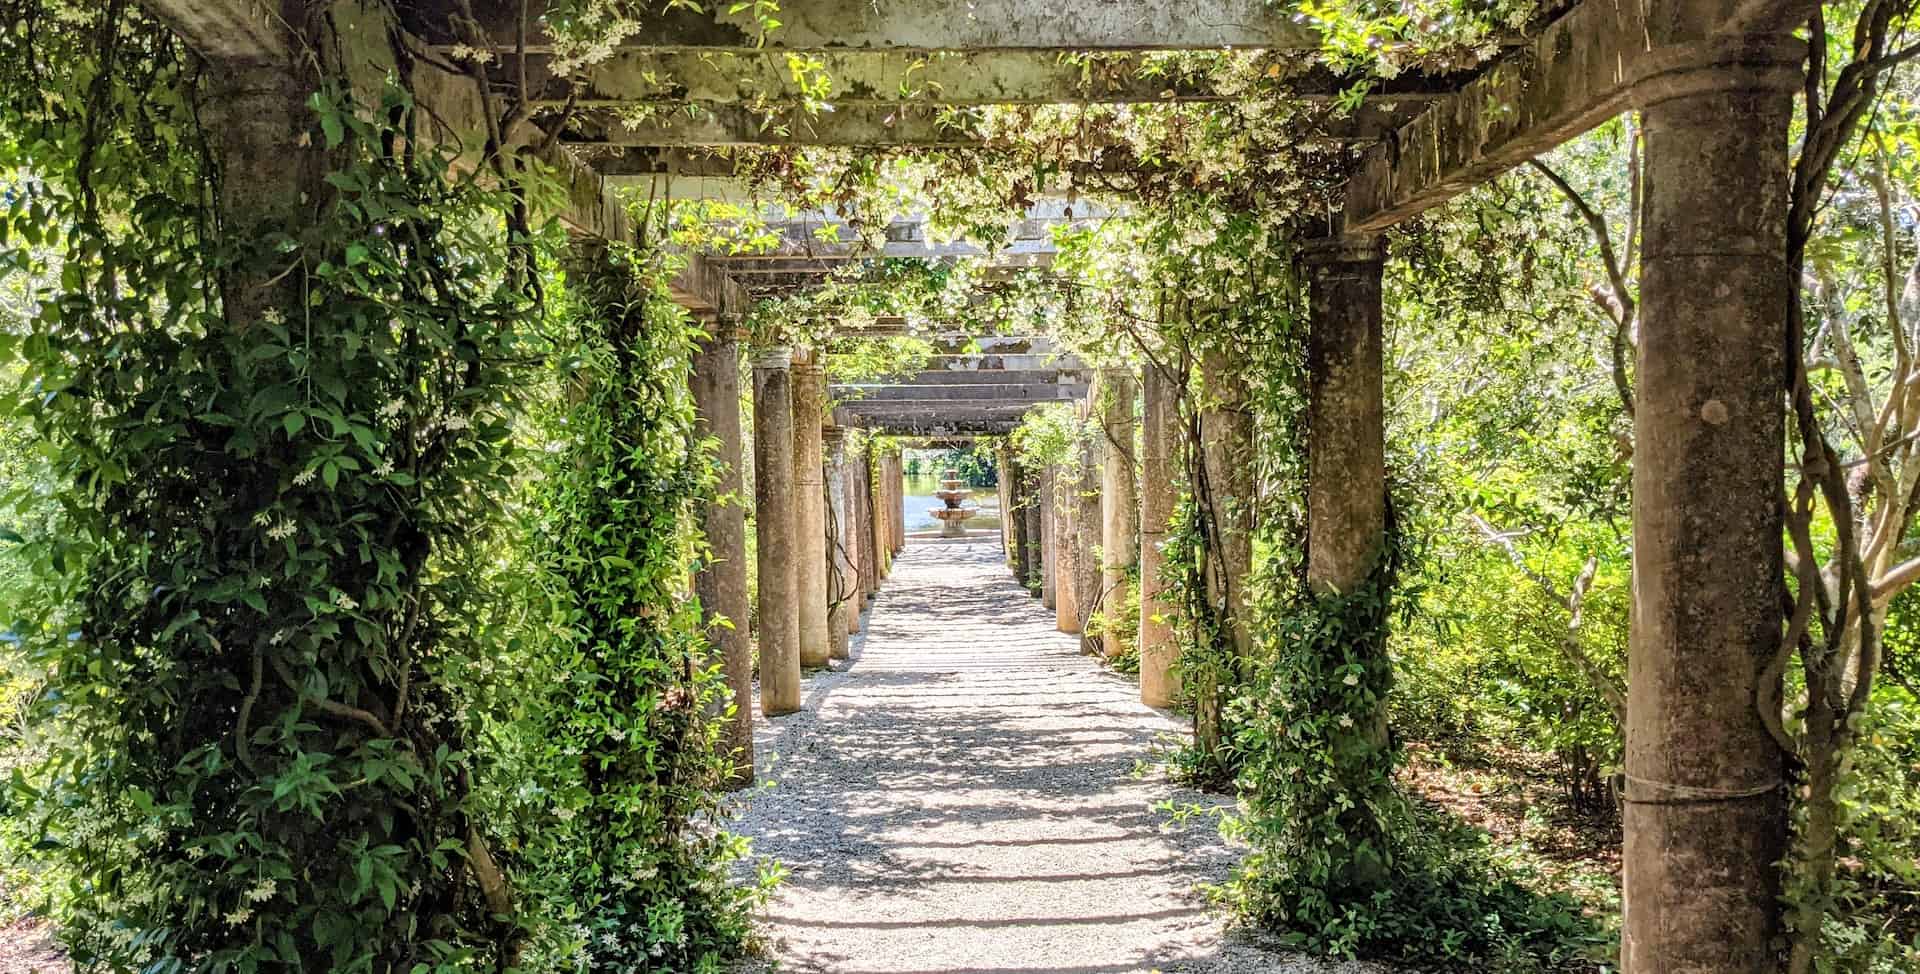 Best things to do in Wilmington NC - Pat Stoy - Pergola Garden at Airlie Gardens by Avi Waxman on Unsplash